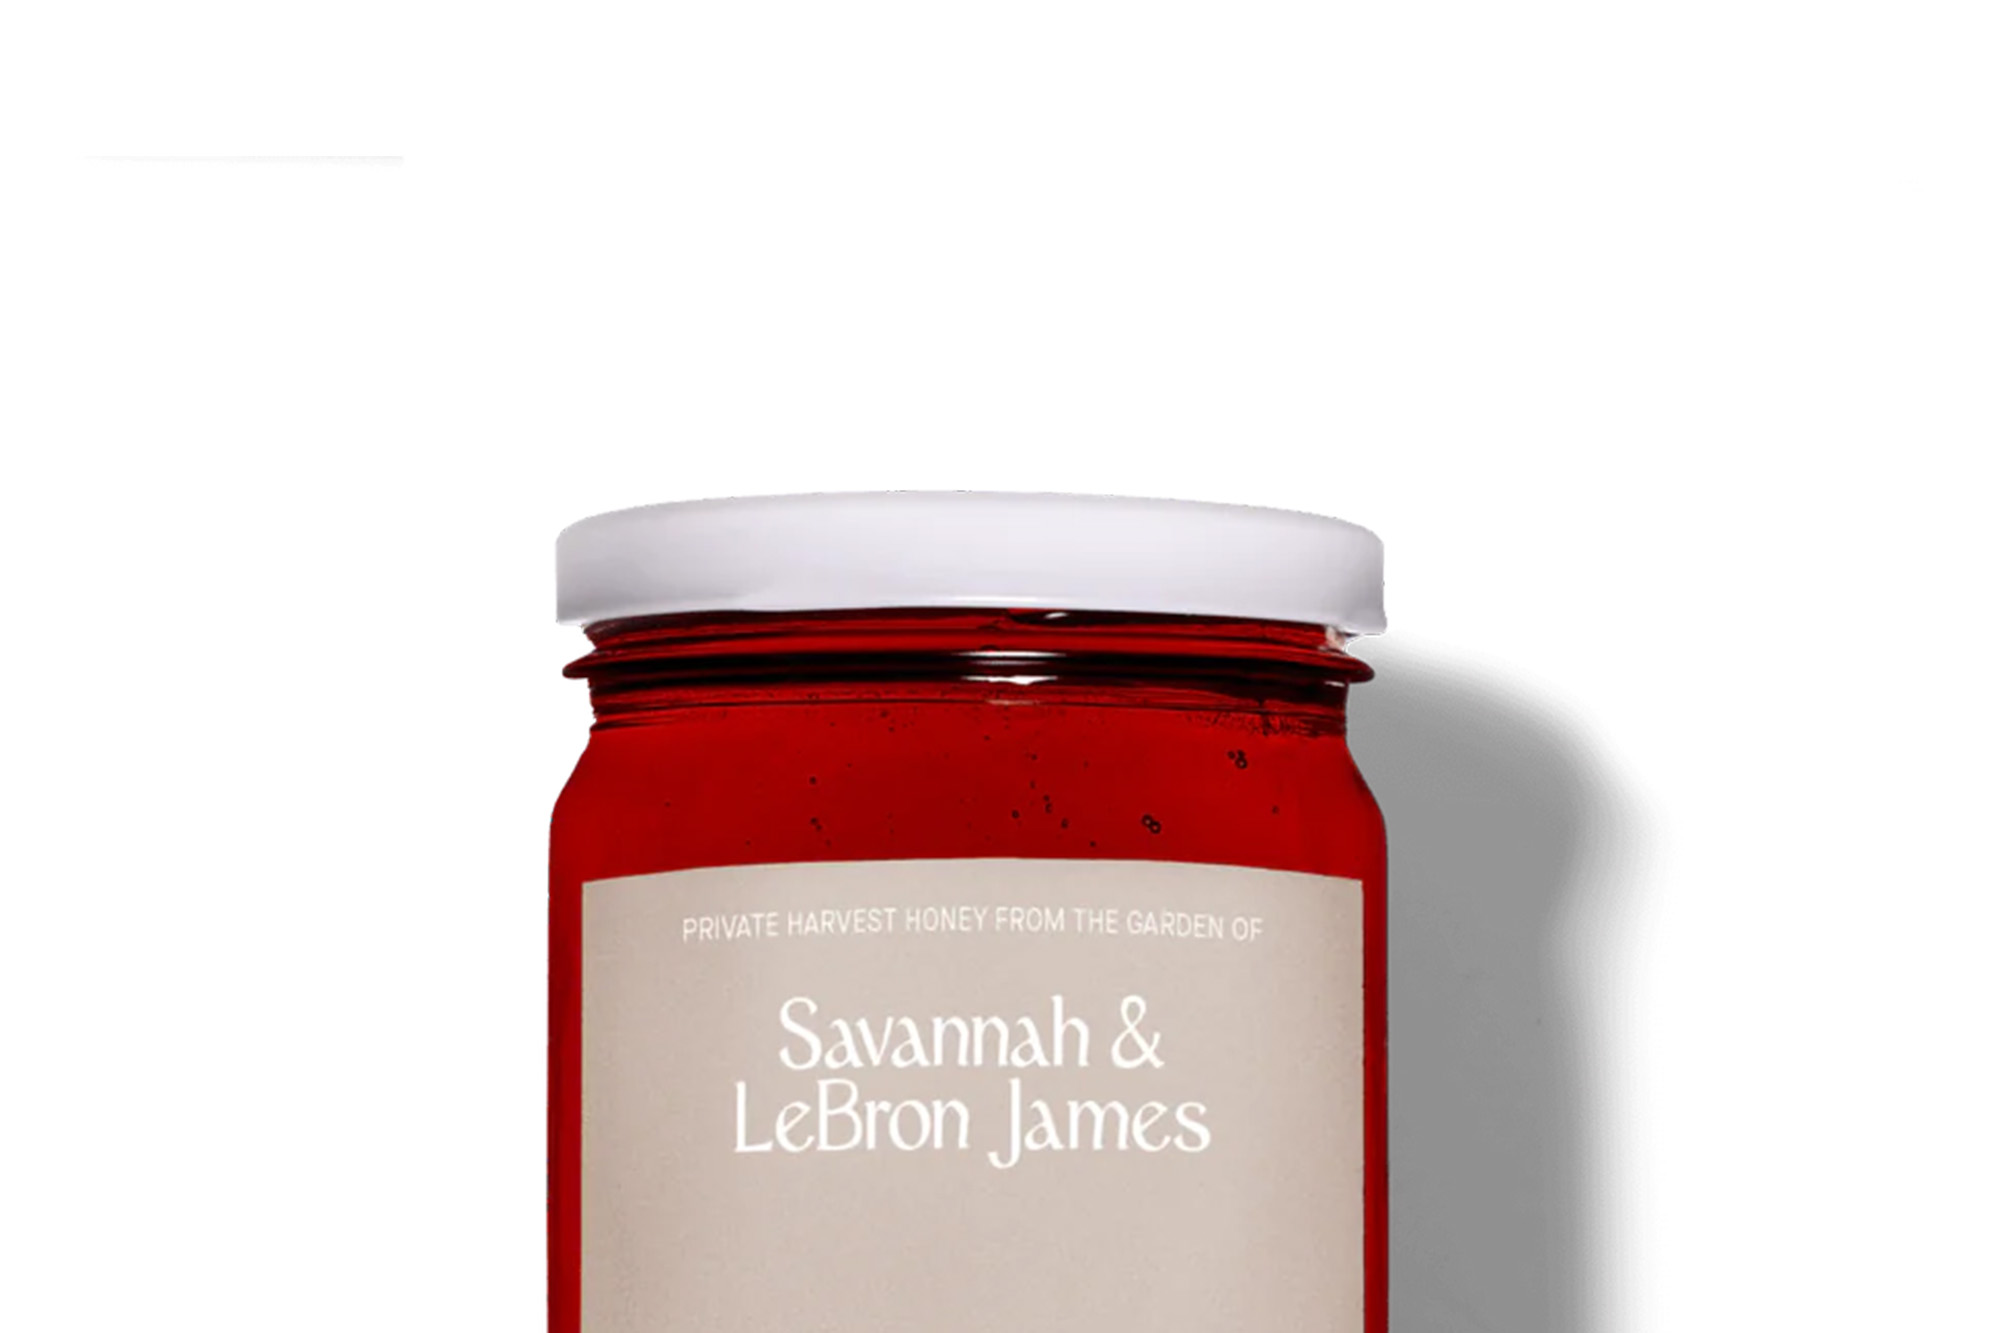 A bottle of red honey that says Savannah & LeBron James on the label